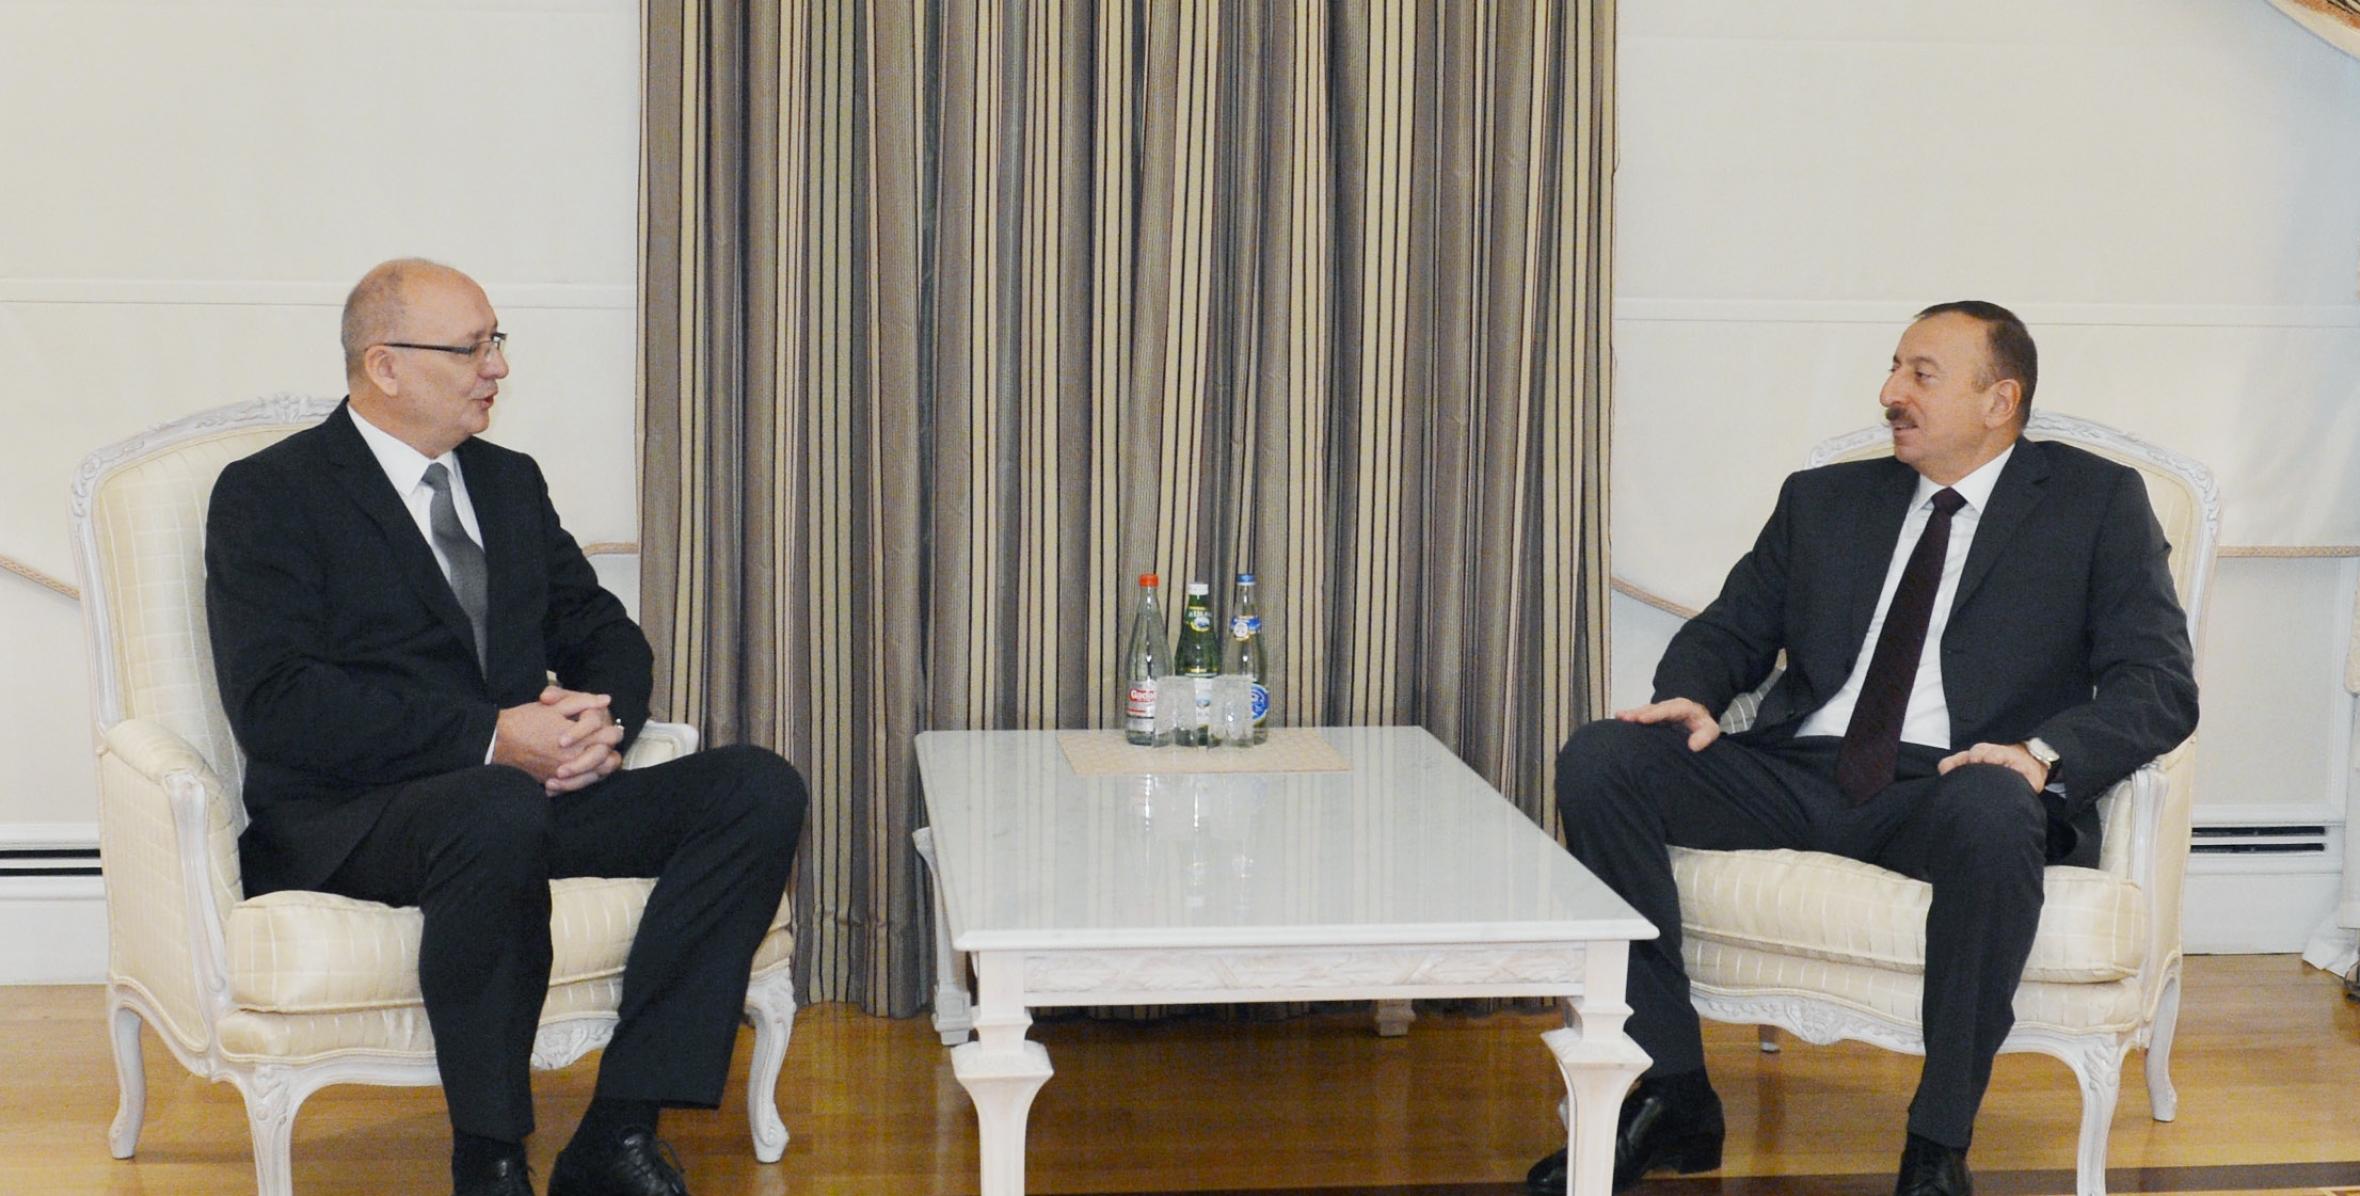 Ilham Aliyev received the Ambassador of the Czech Republic to Azerbaijan in connection with the completion of his diplomatic mission